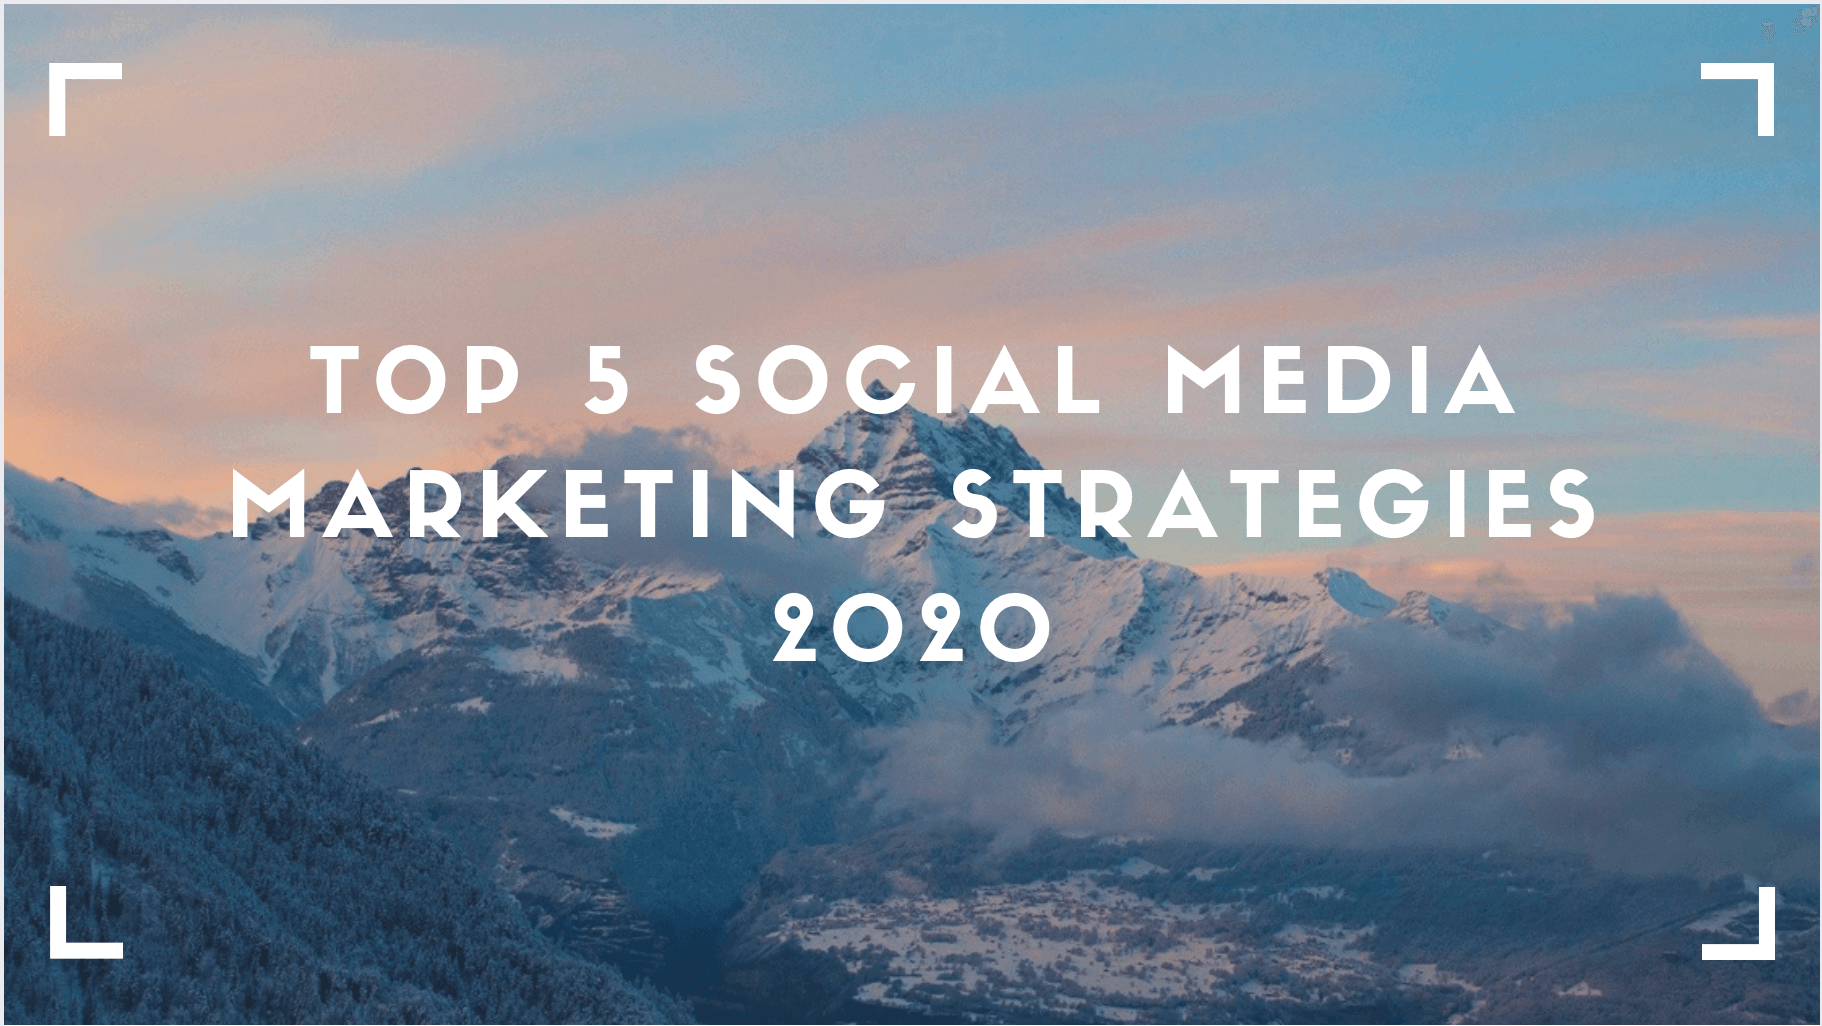 How to Develop an Effective Social Media Strategy in 2020